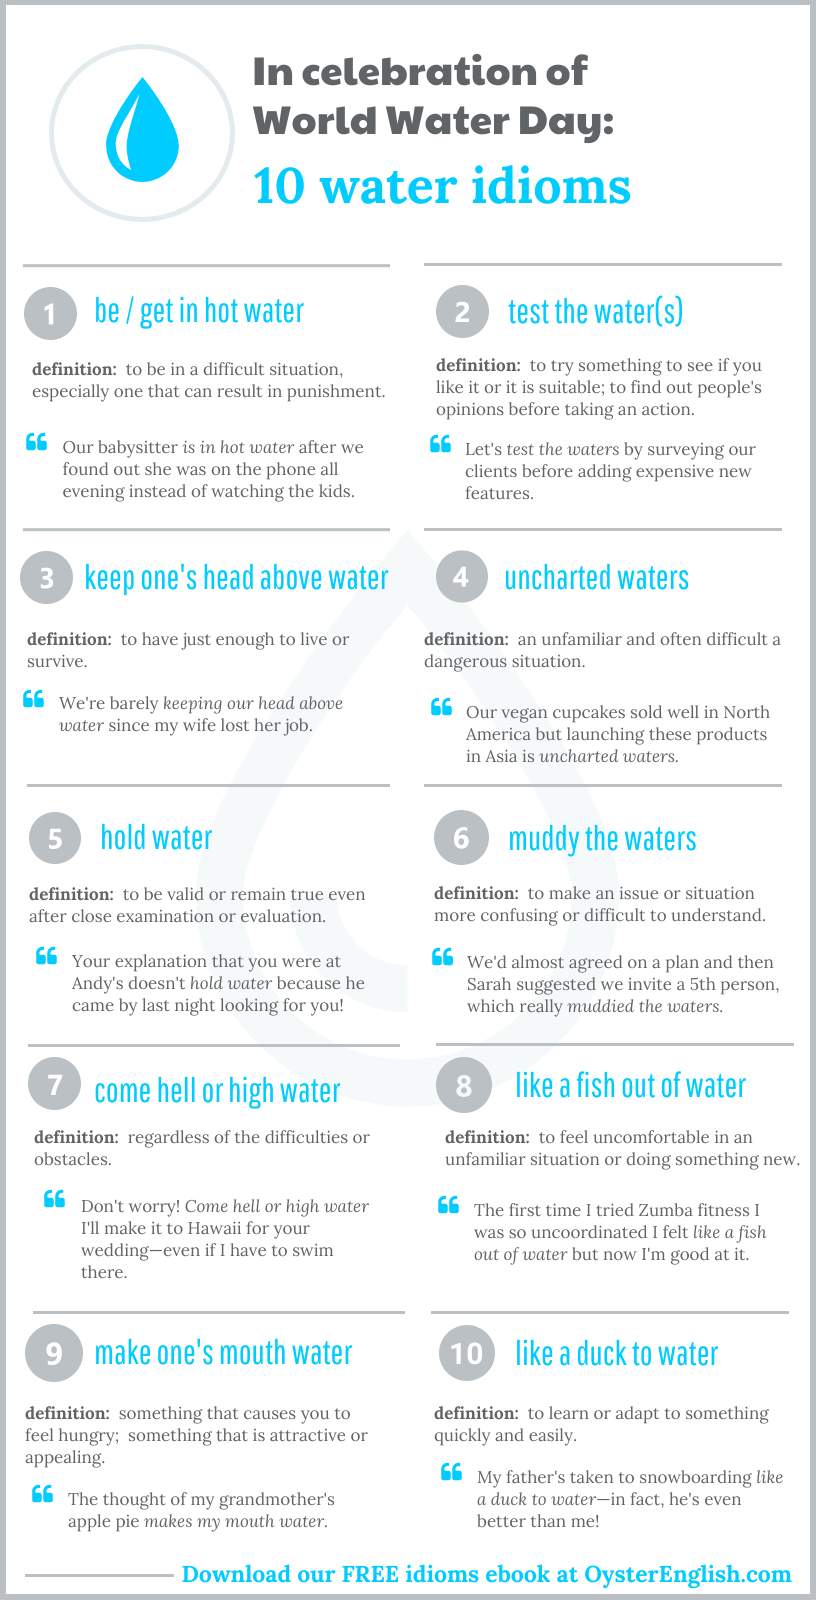 An infographic design of the 10 water idioms, with definitions and examples, that are listed on this website.